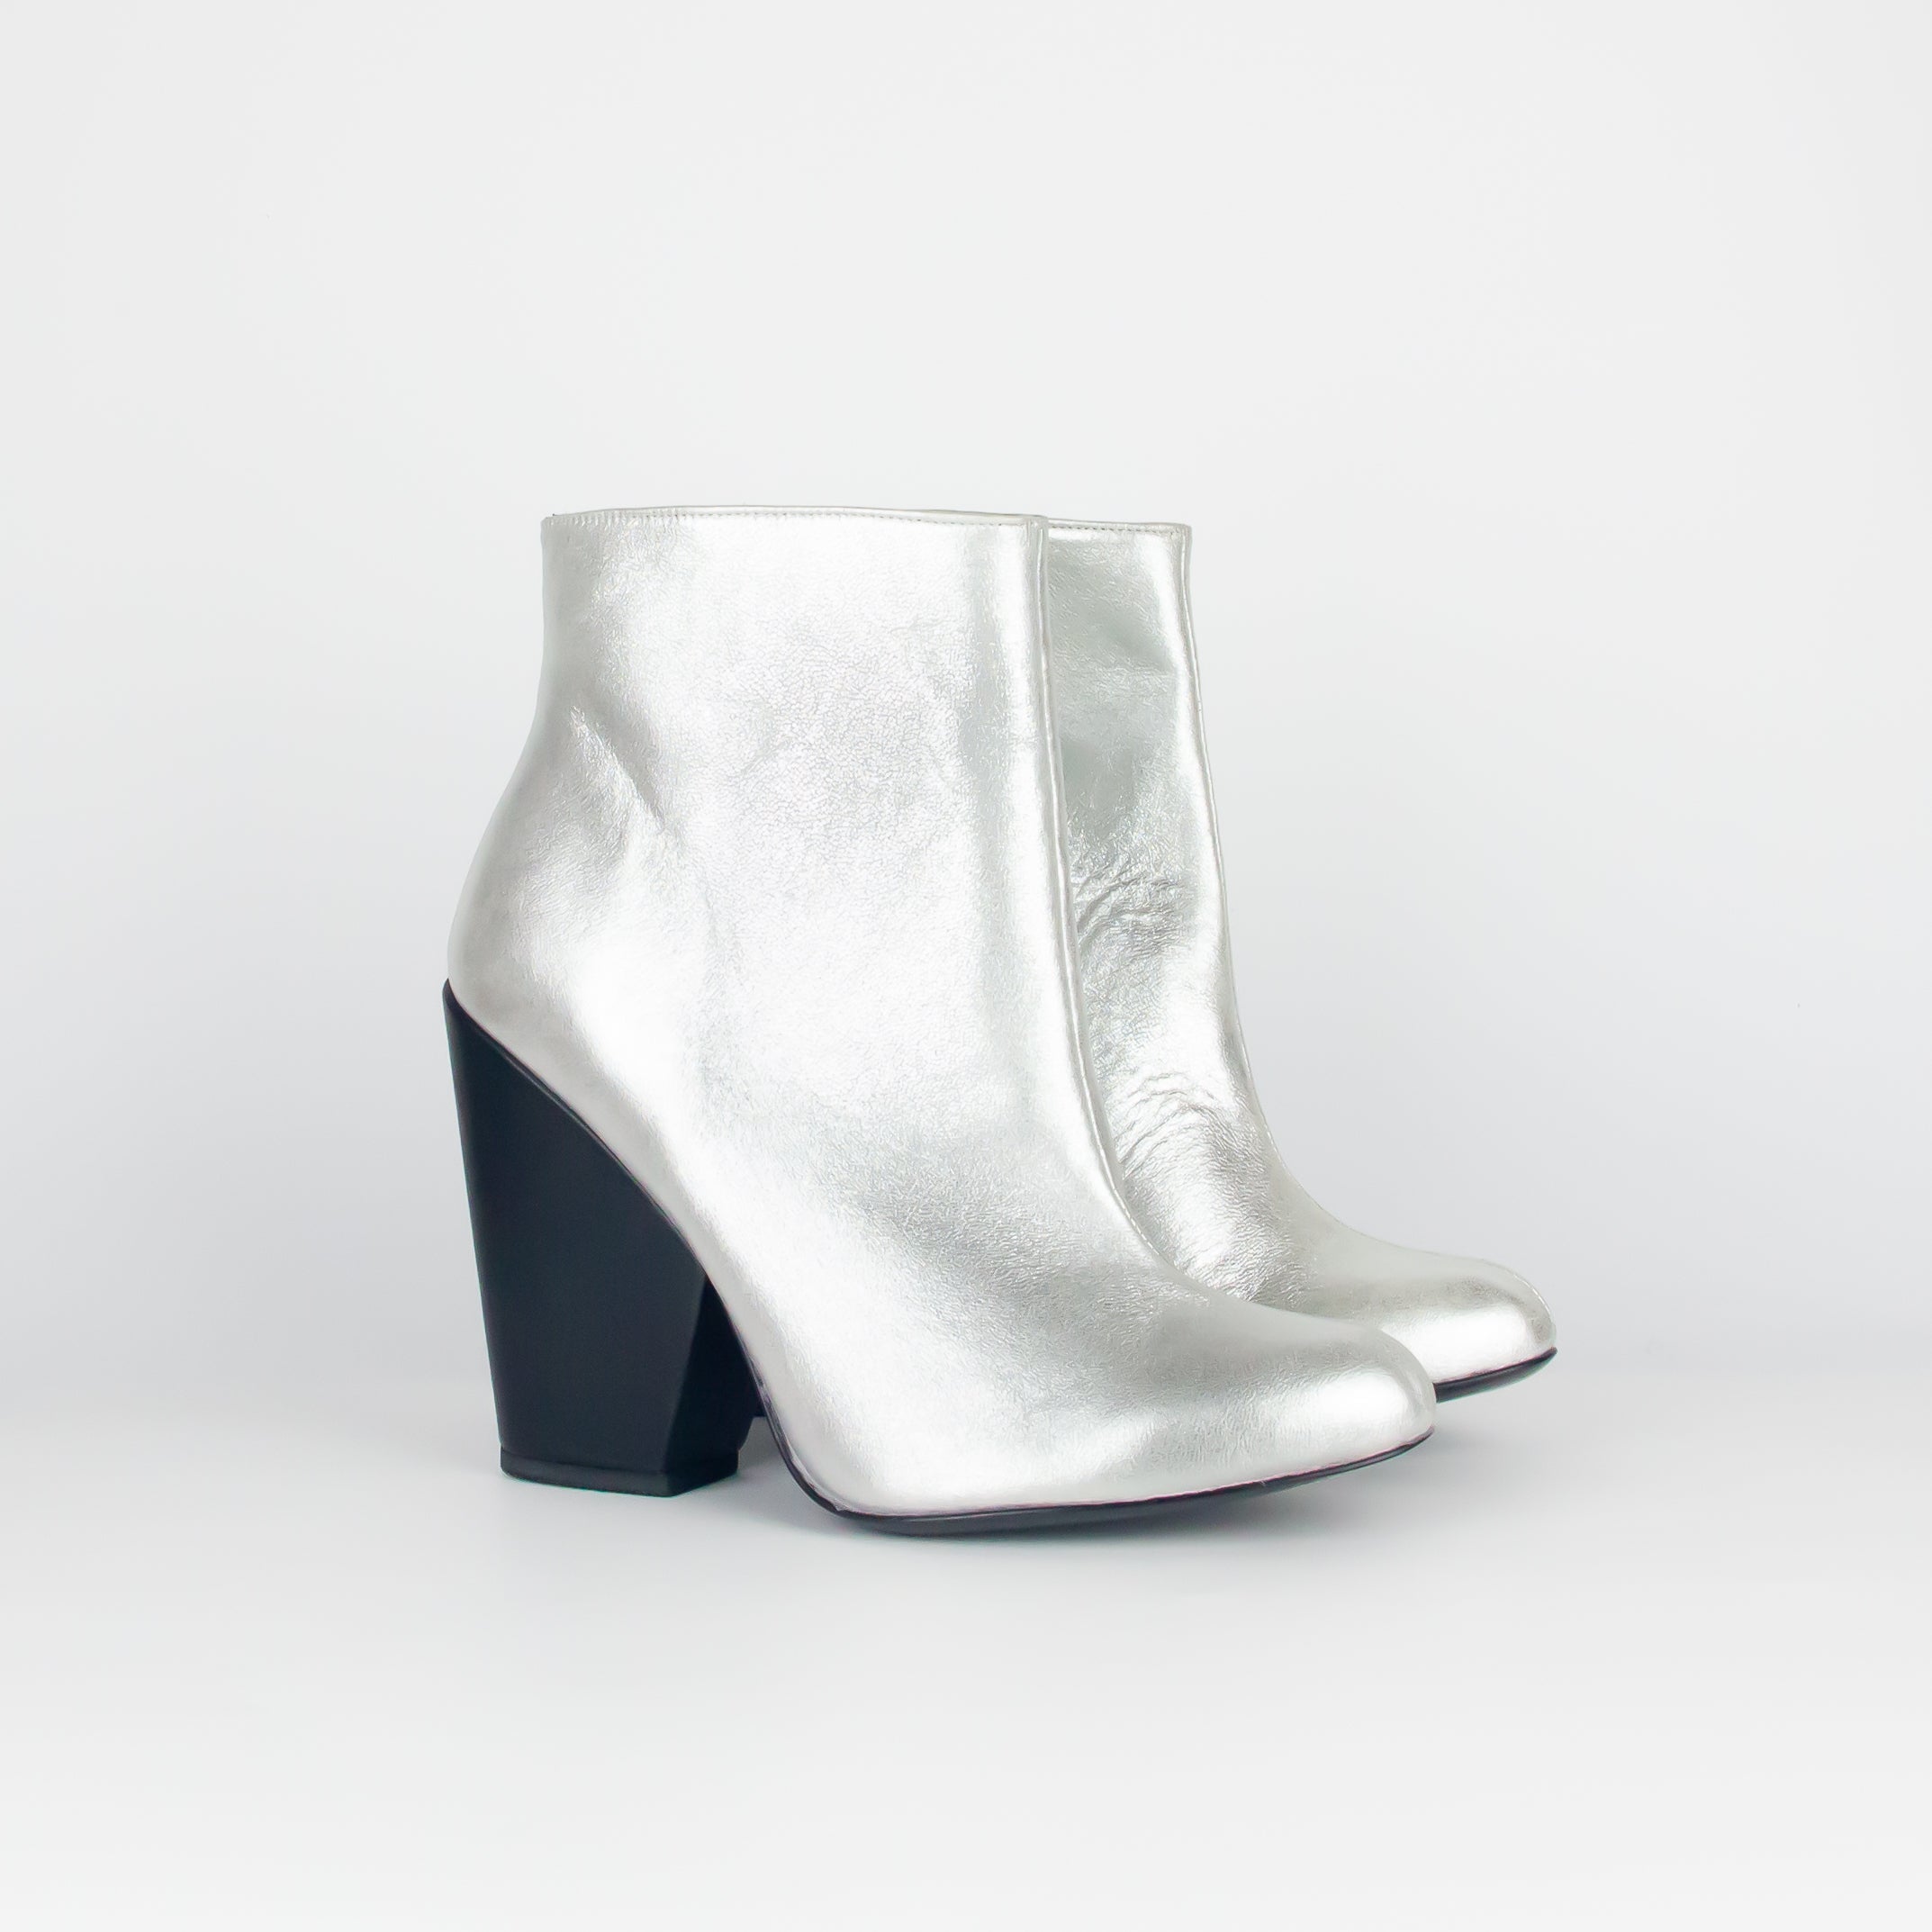 american-retro-bottines-argent-silver-boots1